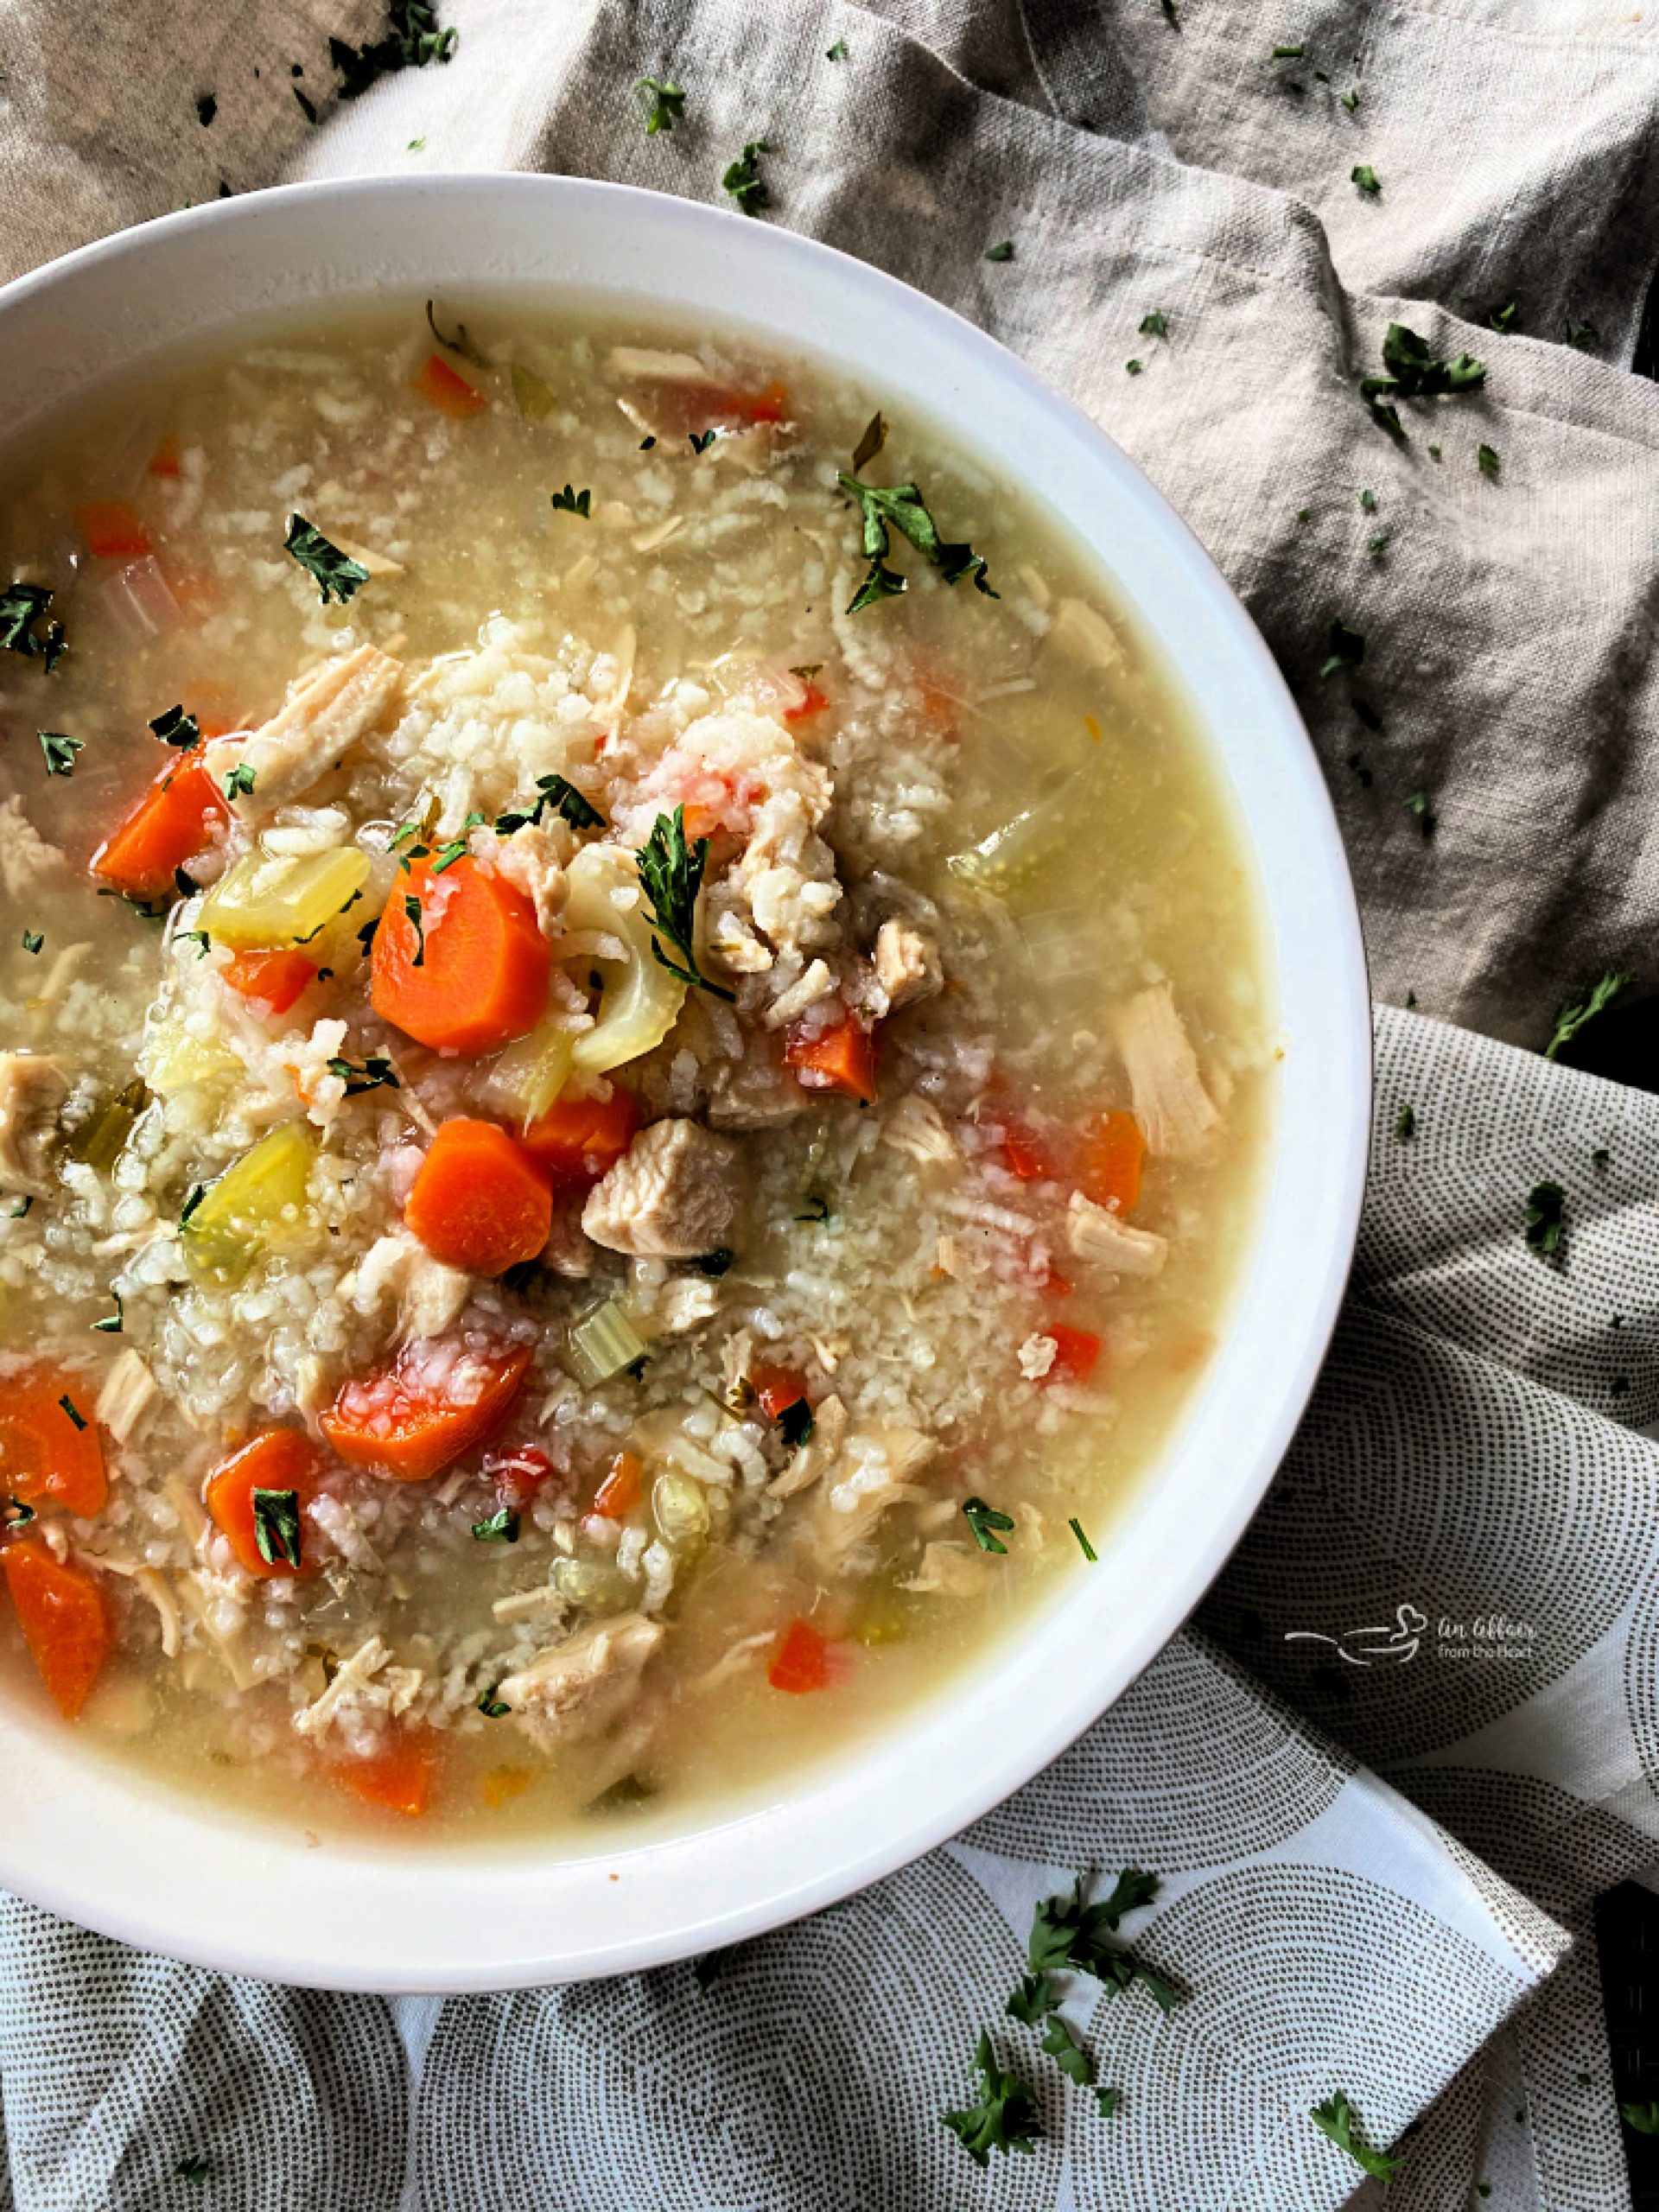 Instant Pot Wild Rice Soup with Chicken - Simply Happy Foodie